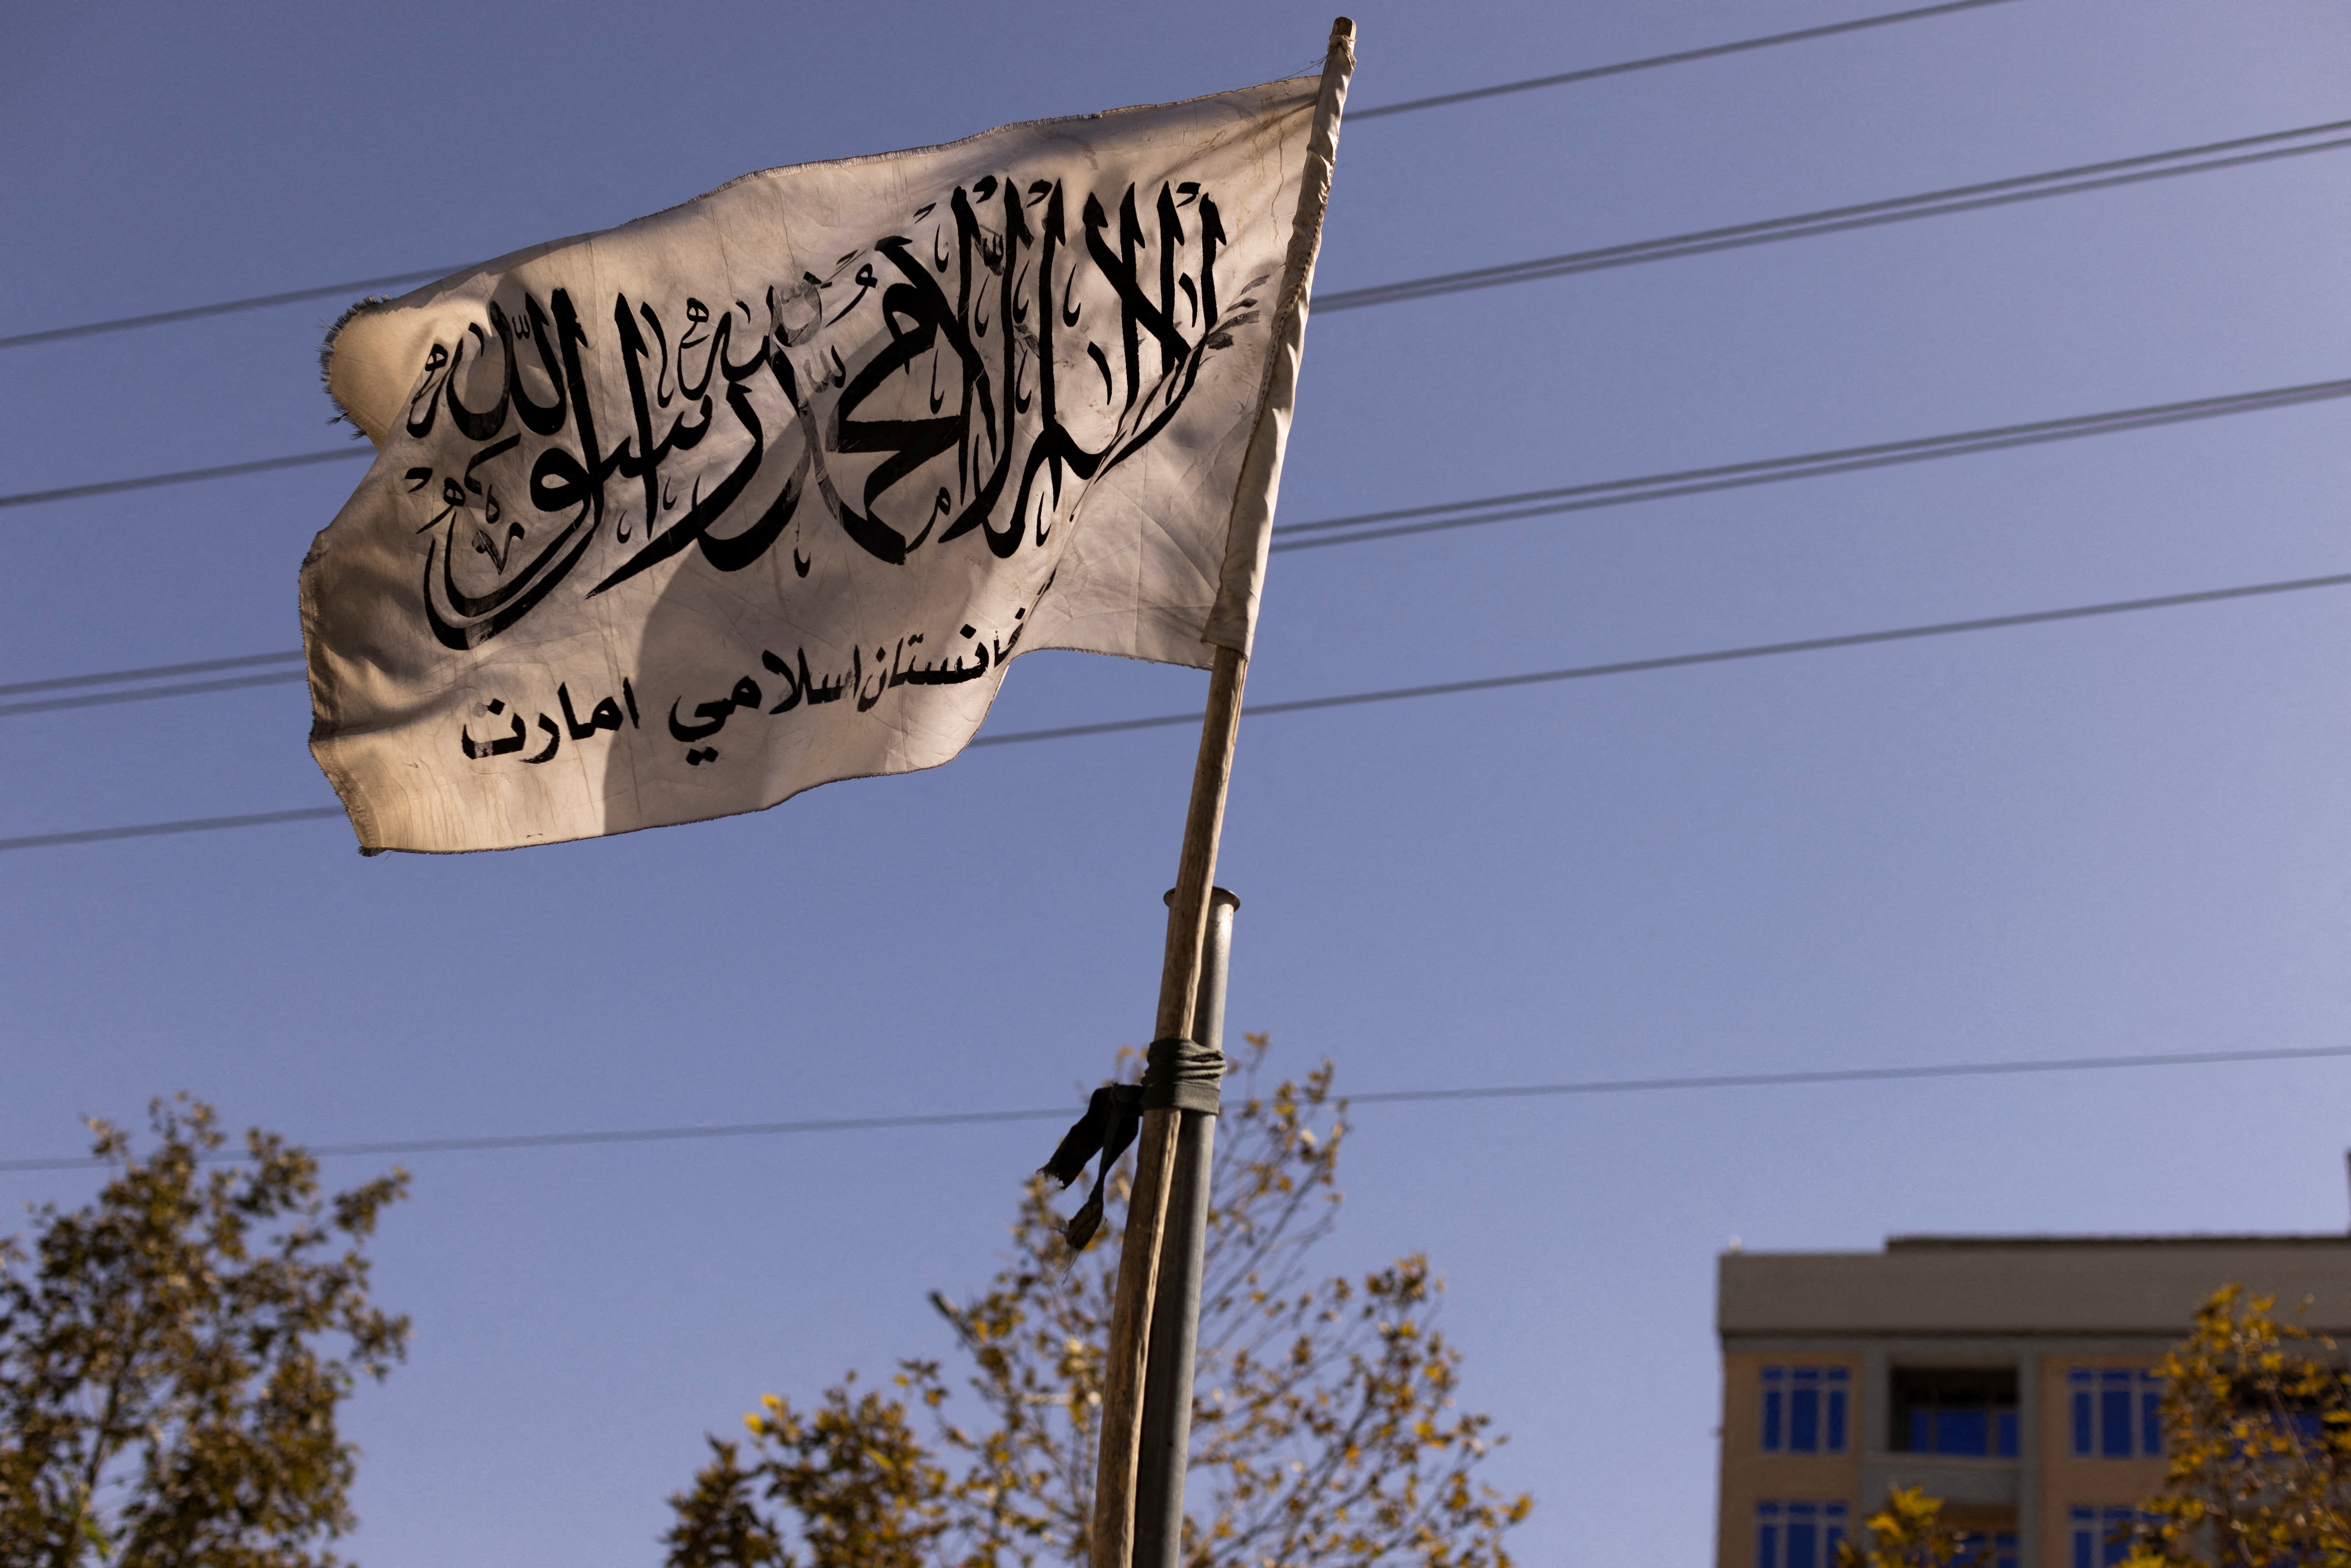 An Islamic Emirate of Afghanistan flag hangs over a street in Kabul, Afghanistan, October 19, 2021. Picture taken October 19, 2021. REUTERS/Jorge Silva